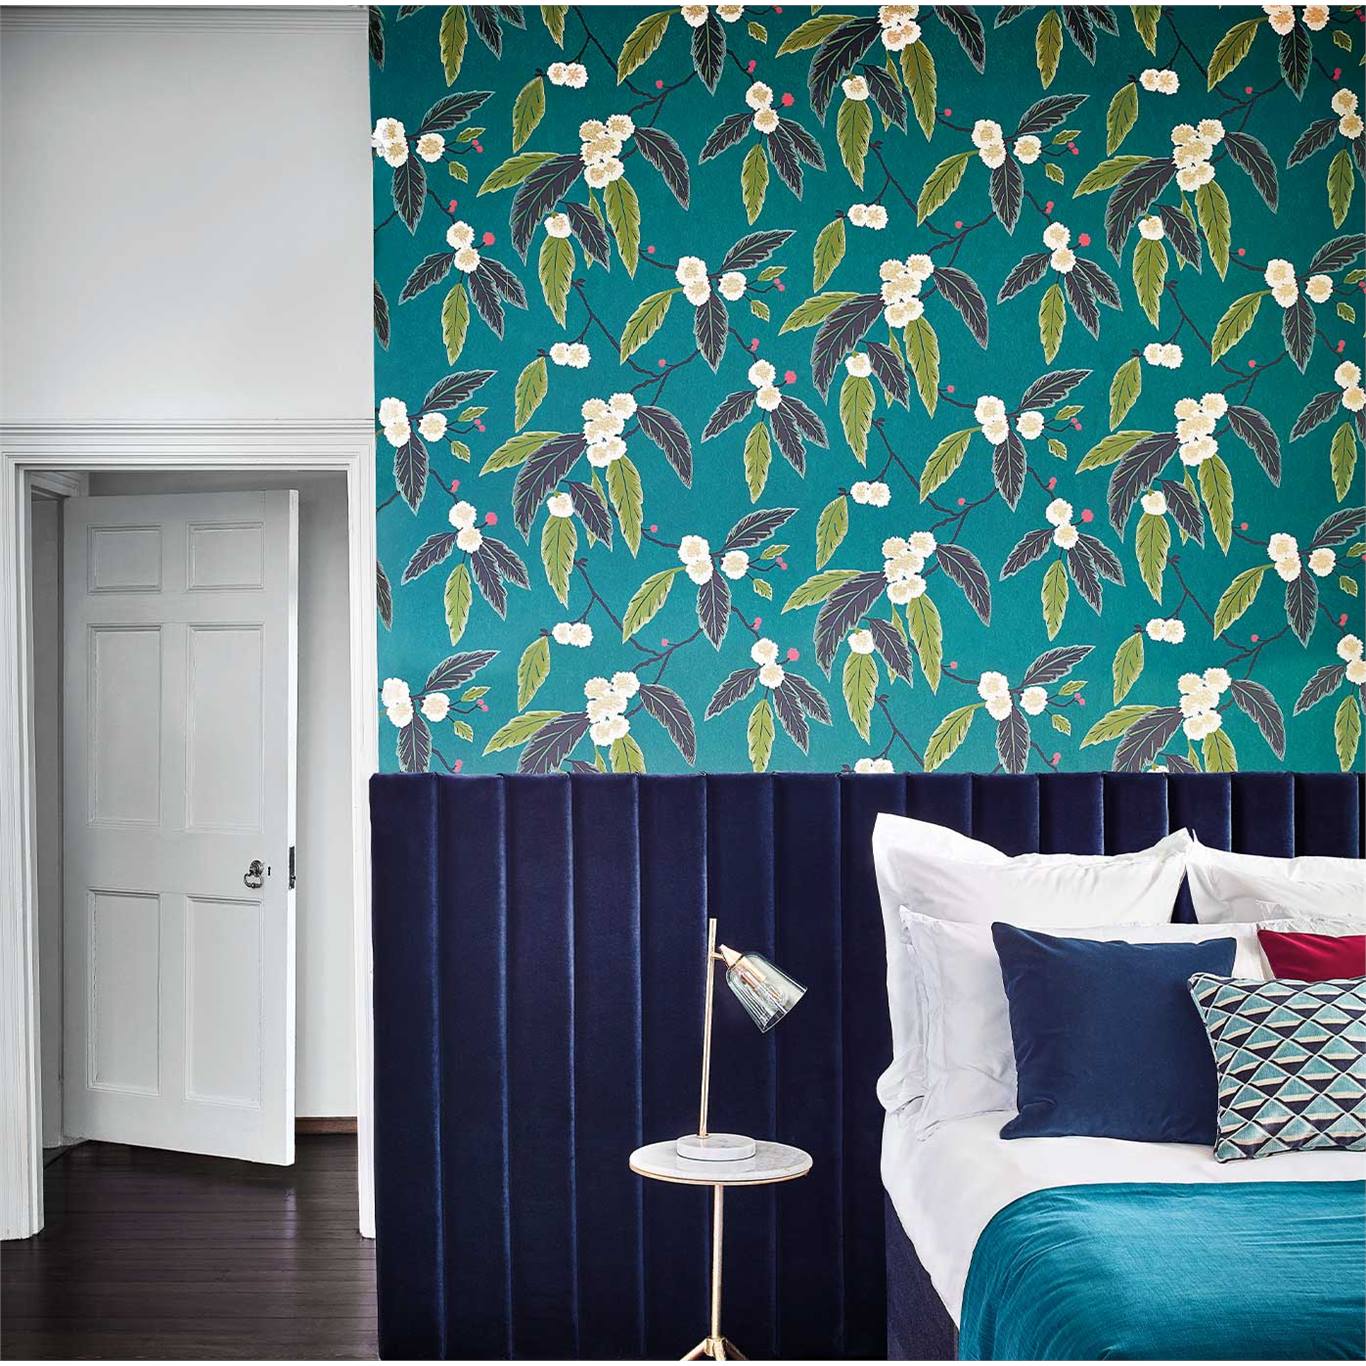 Coppice, A Wallpaper By Harlequin, Part Of The Salinas - Harlequin Coppice - HD Wallpaper 